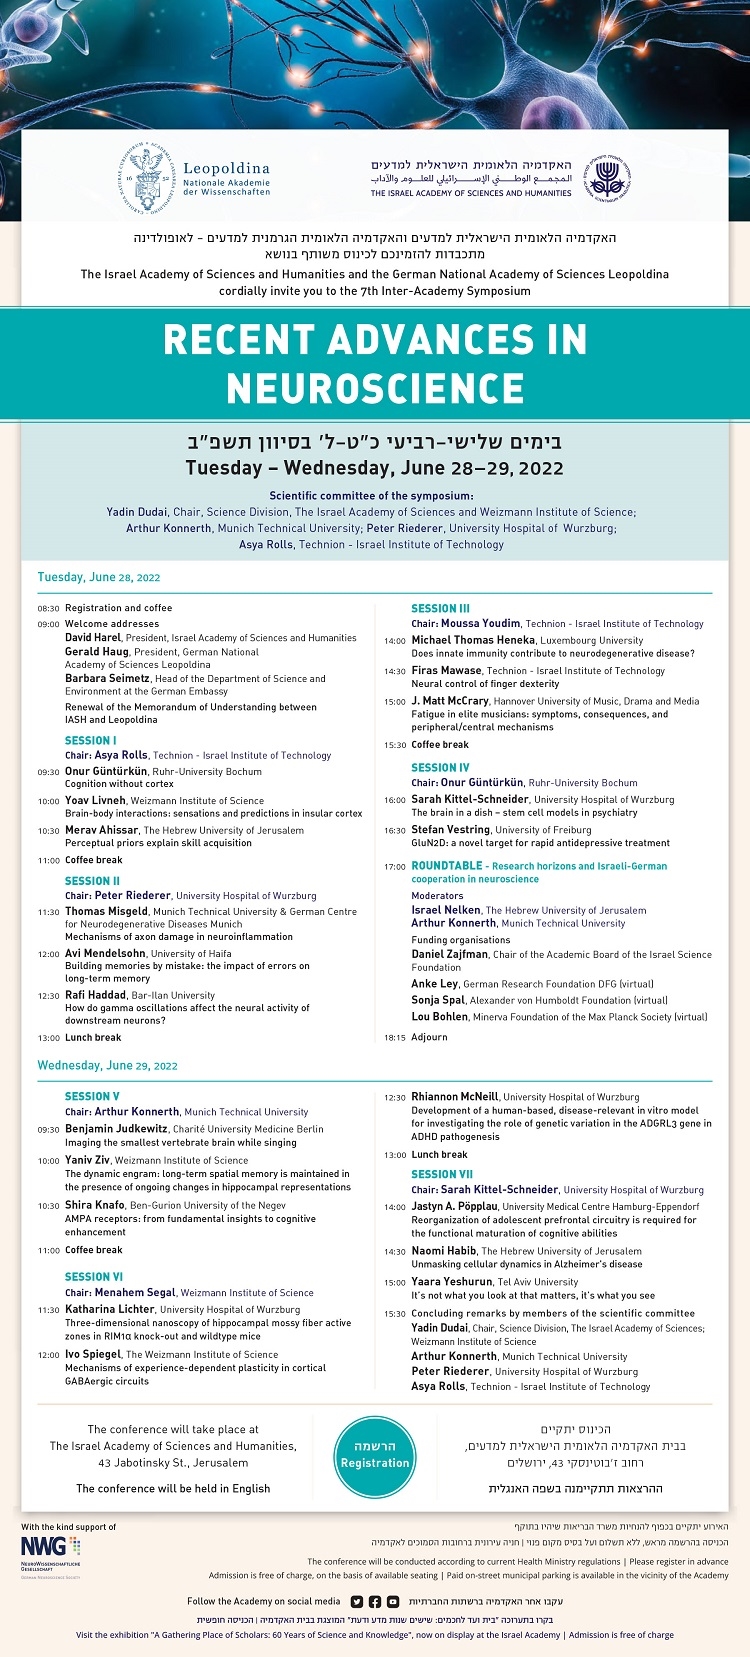 The 7th Inter-Academy Symposium: Recent Advances in Neuroscience